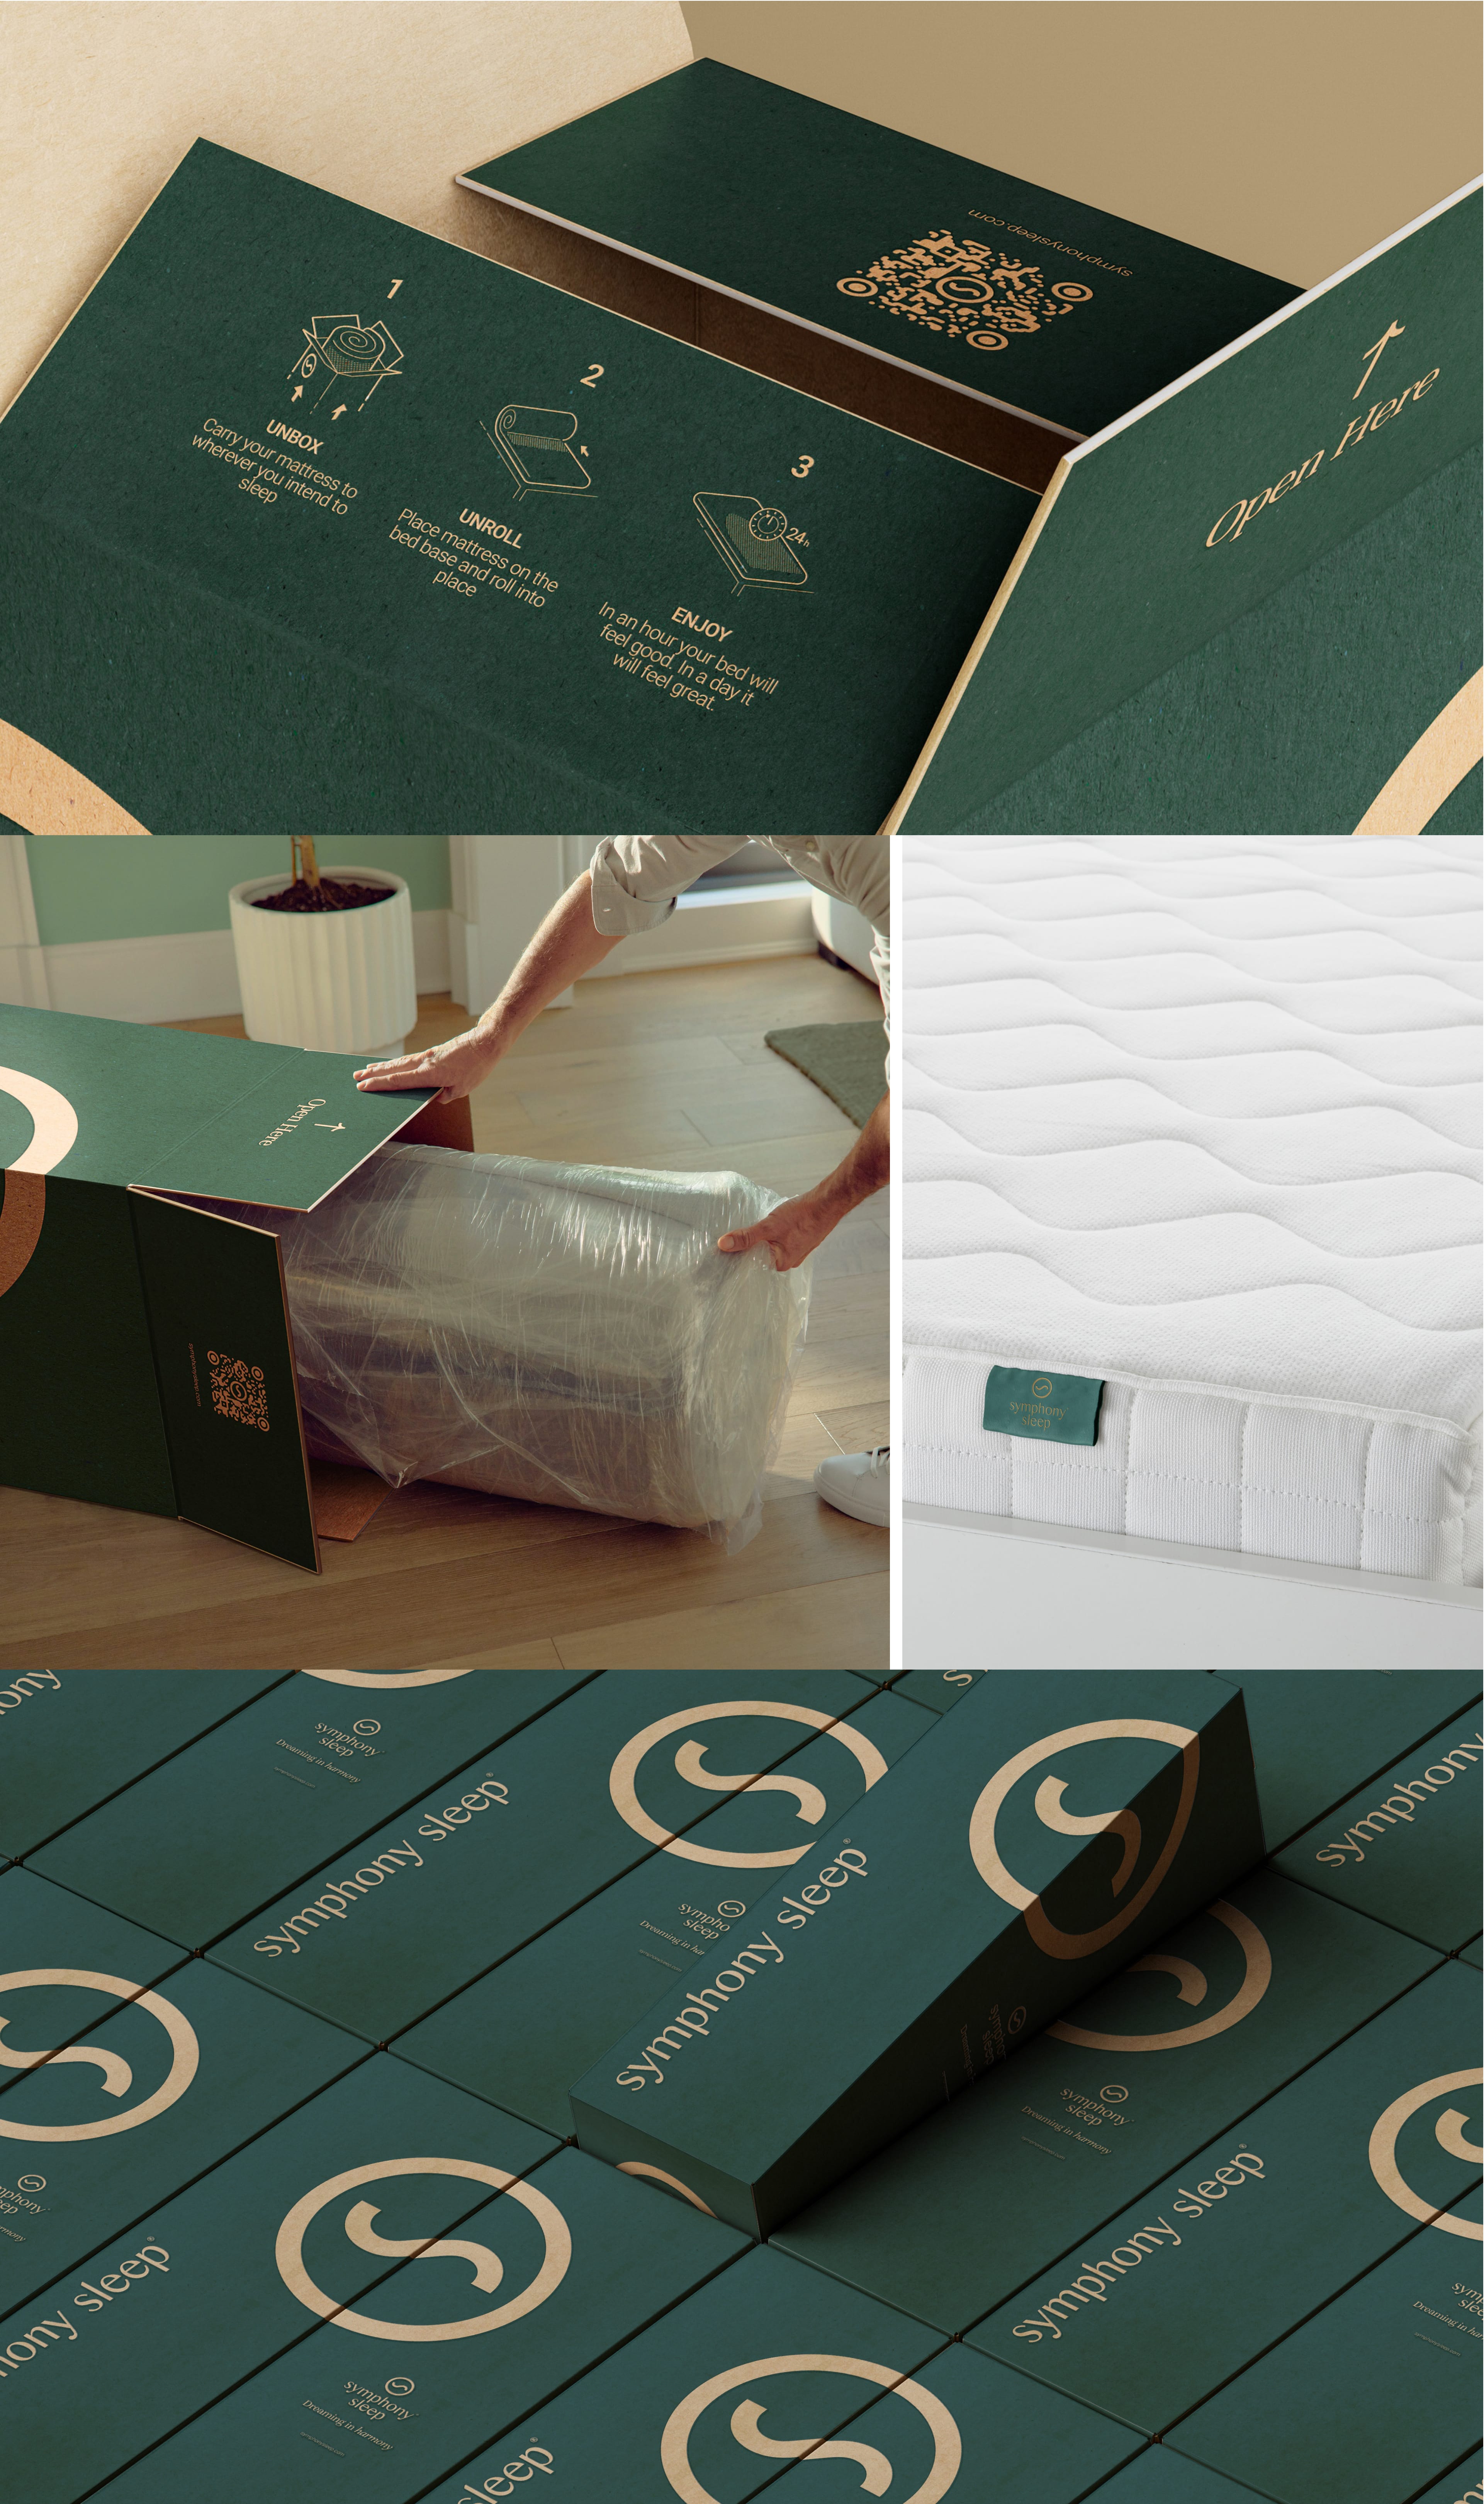 DD.NYC Branding Design for Sympfony Sleep. green Packaging shown from different angles. Mattress with logo Sympfony Sleep